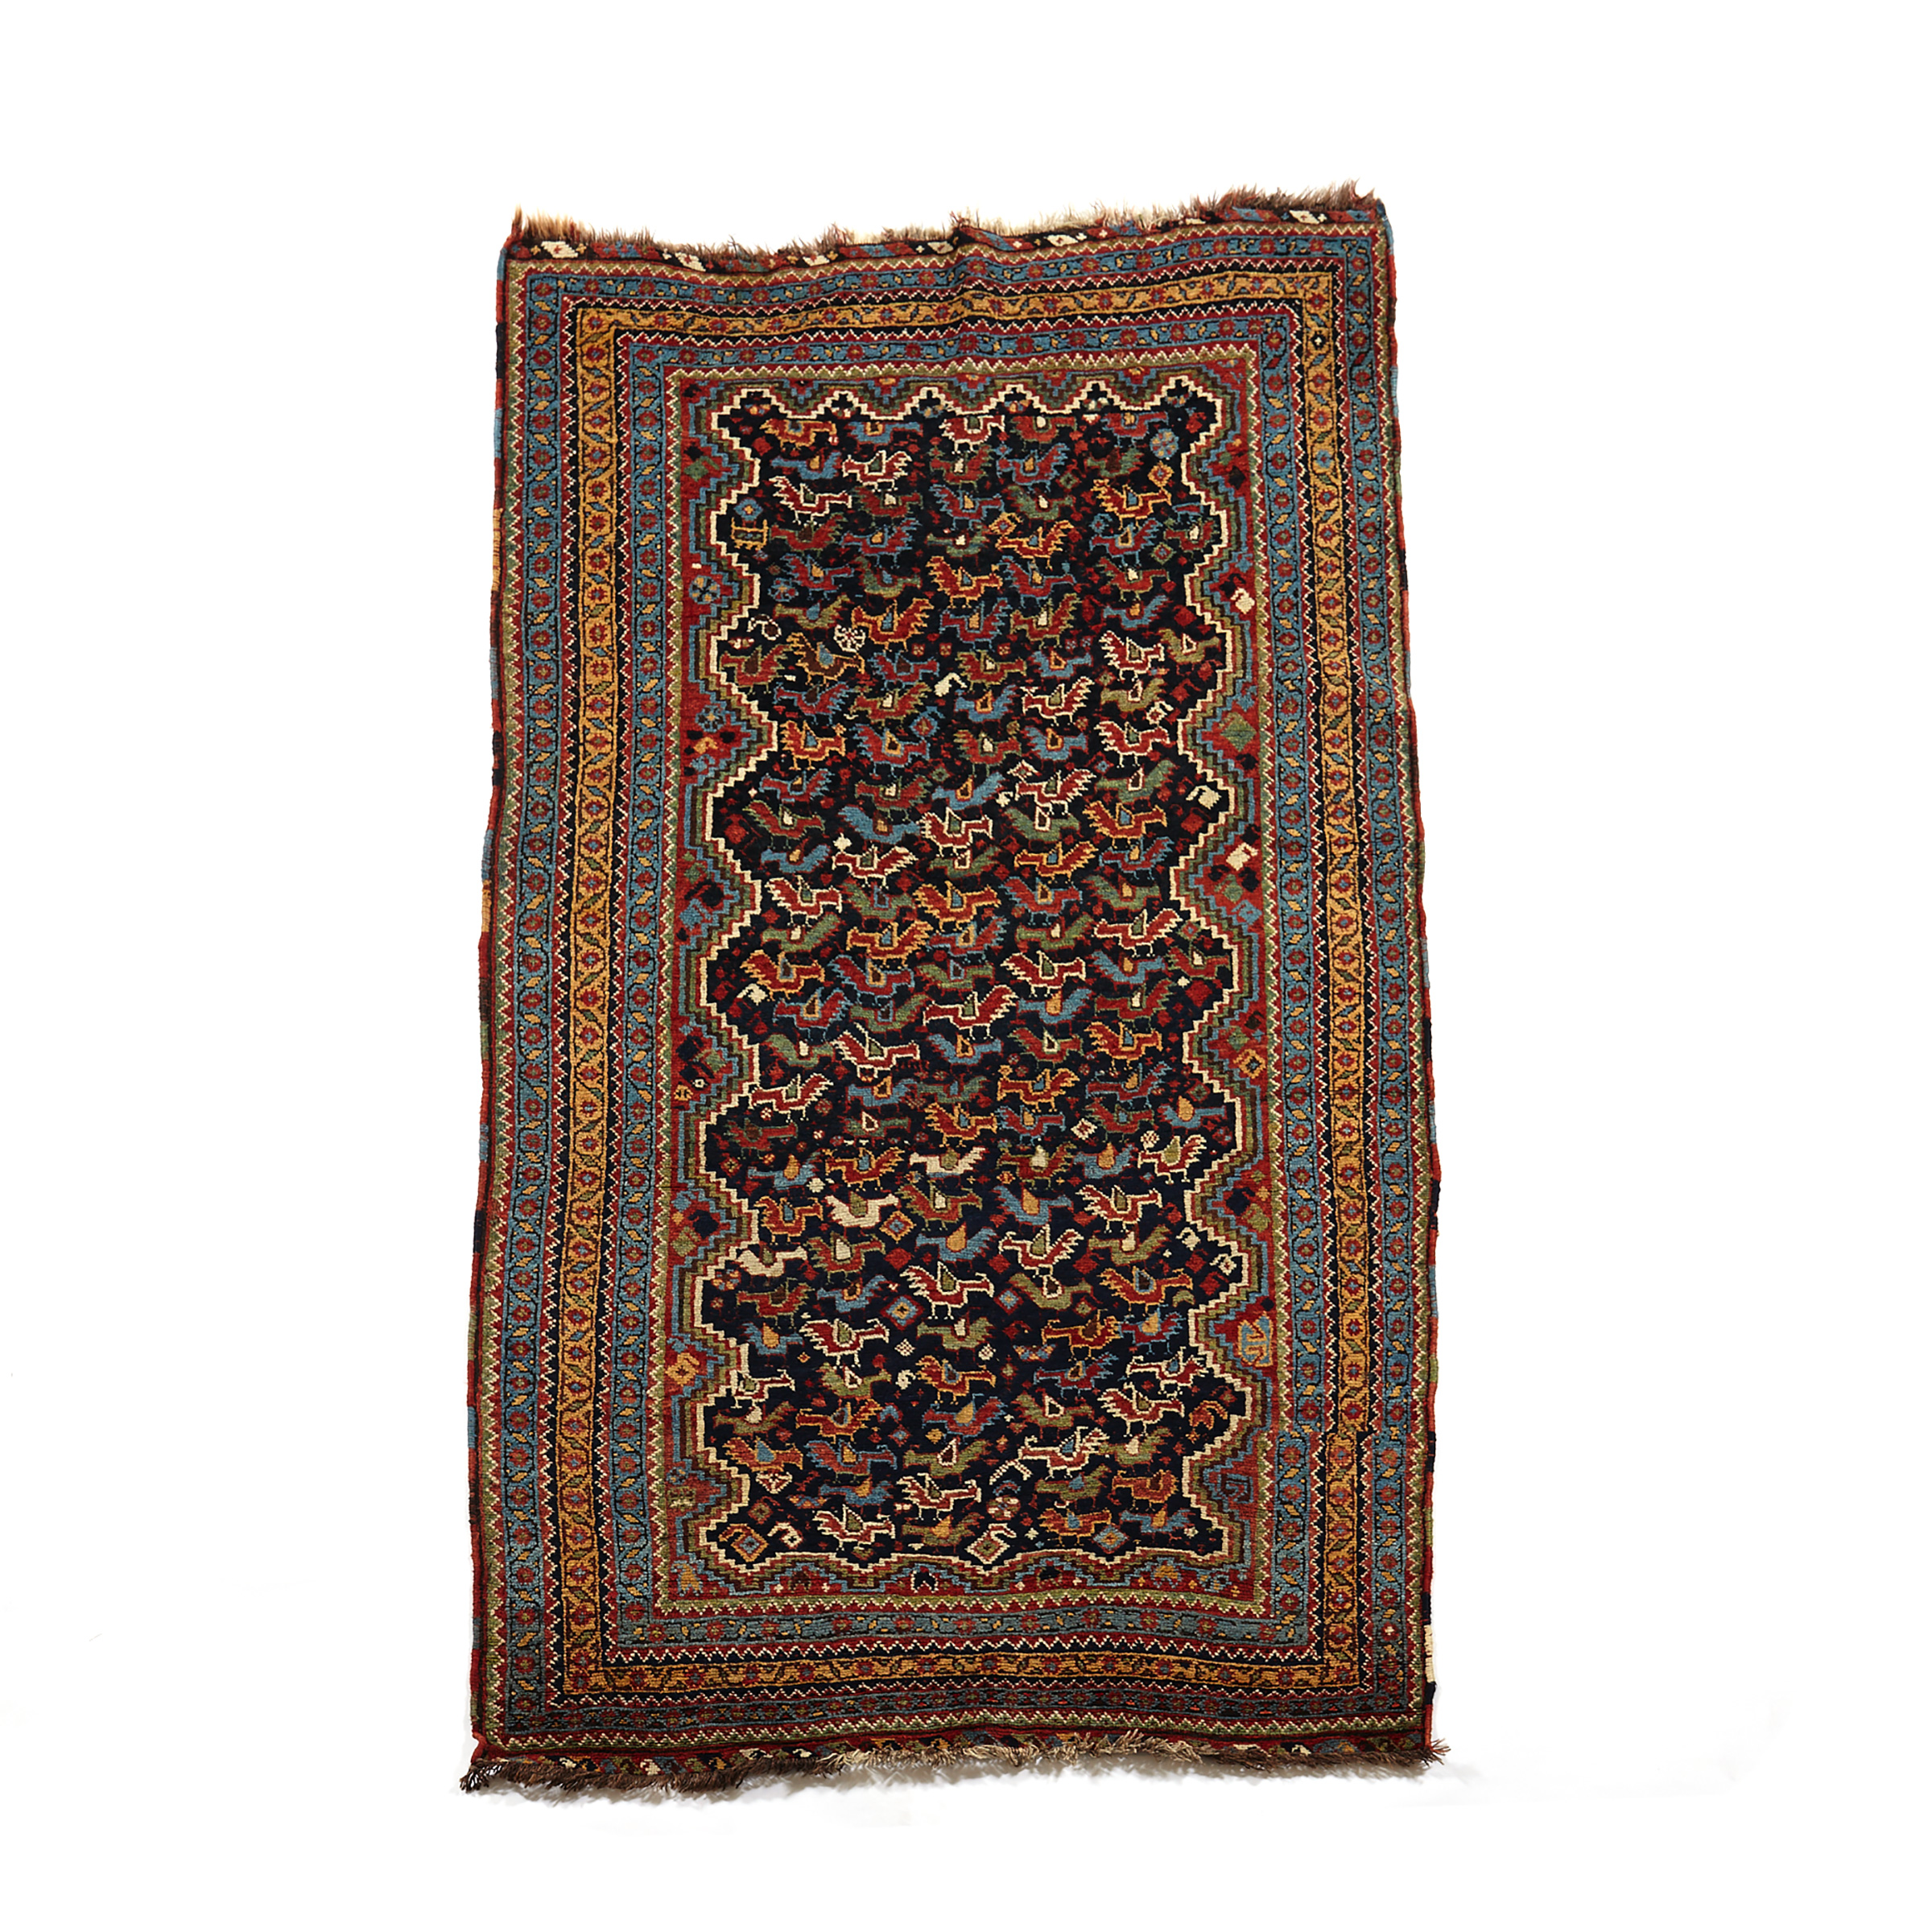 Afshar Rug, Persian, late 19th/ early 20th century